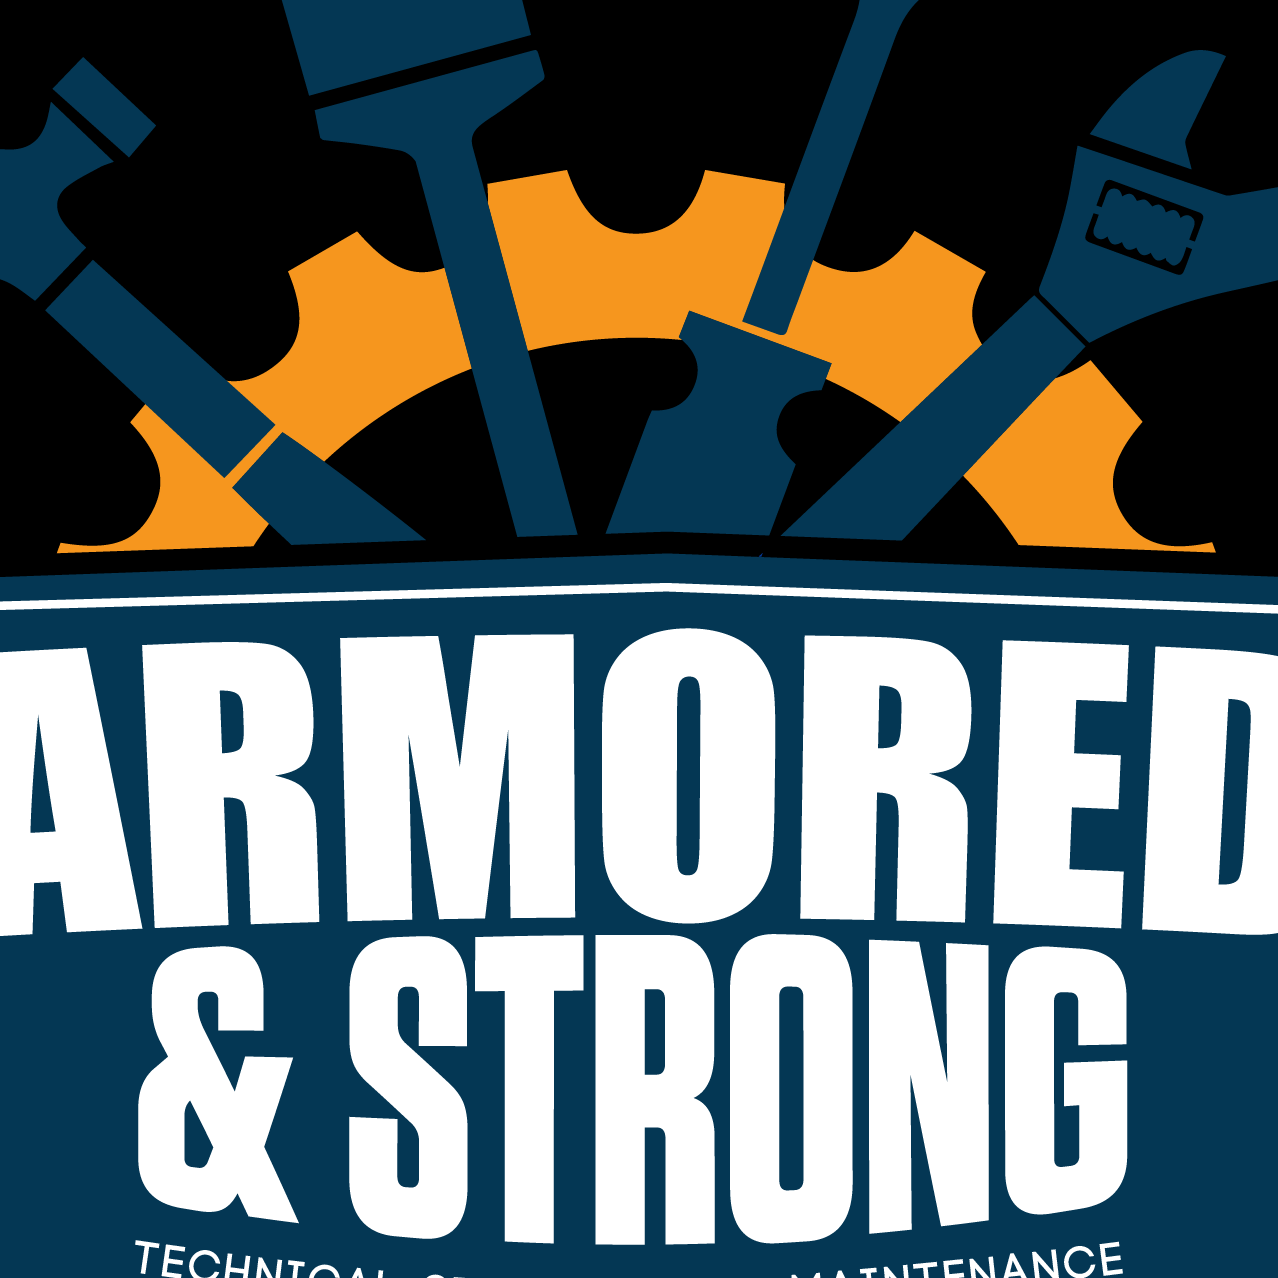 Armored Strong